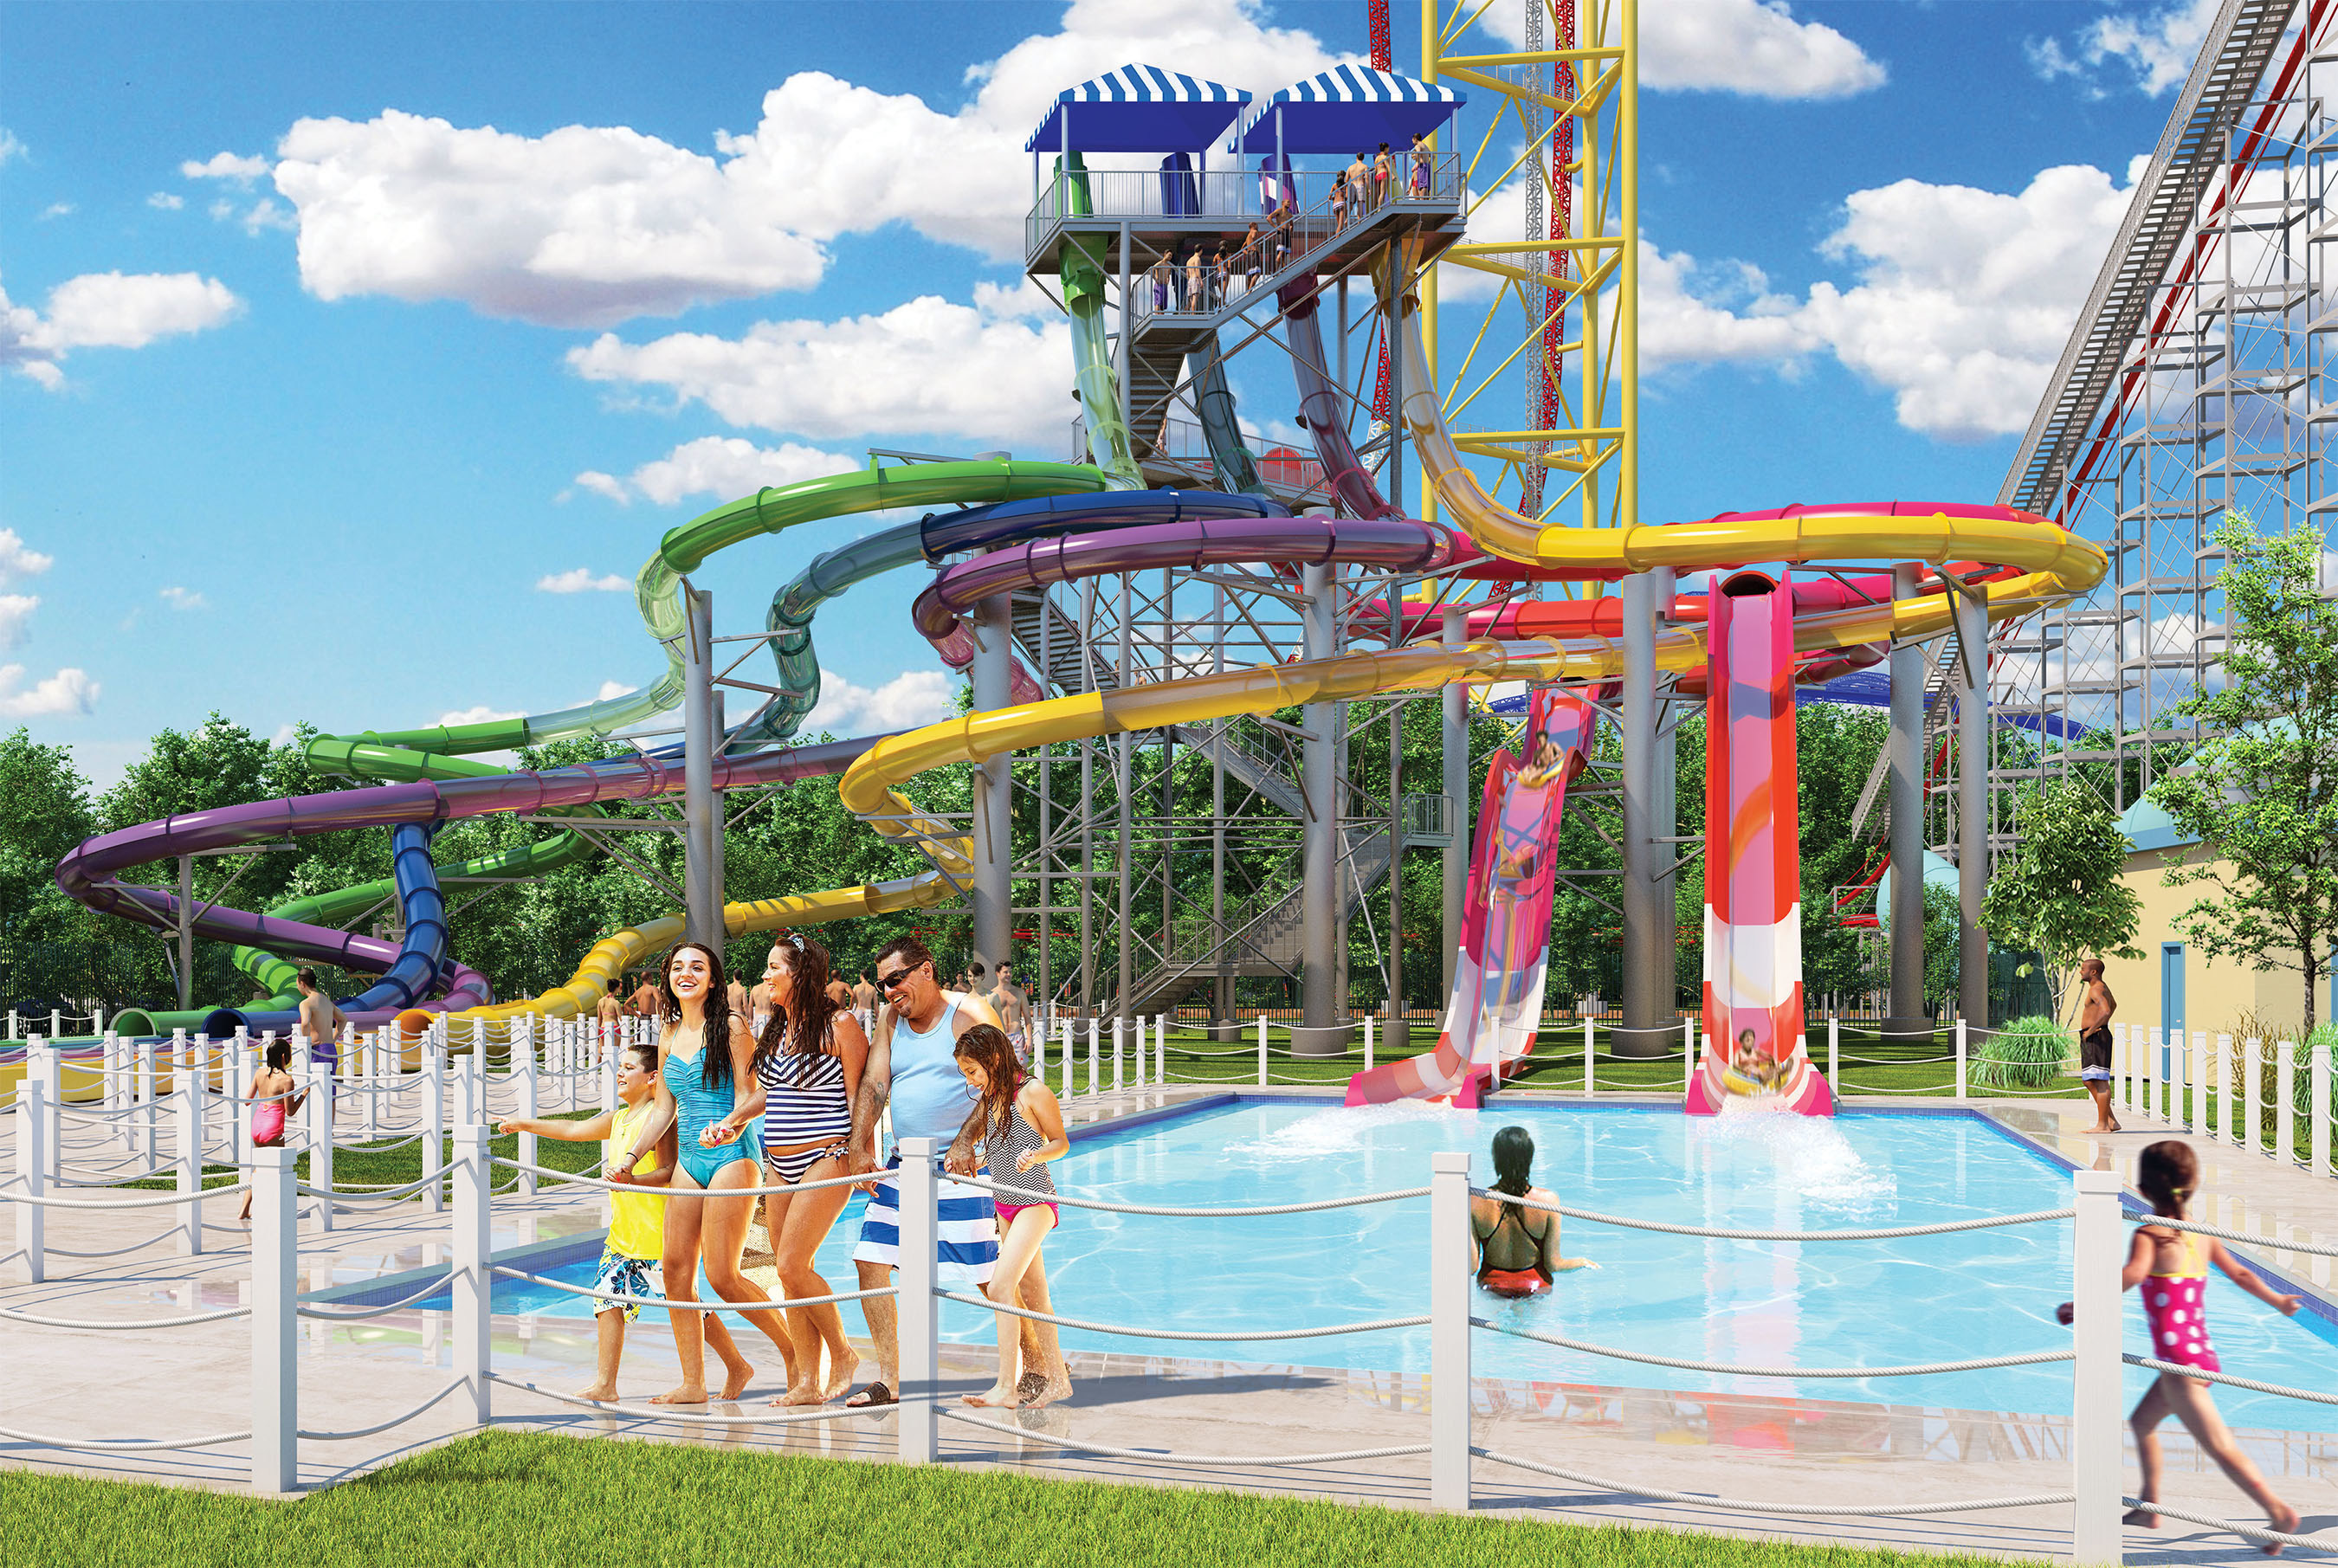 Point Plummet, Starboard Surge and Portside Plunge are all part of a six-story-tall slide structure that will be the highlight of the new Cedar Point Shores Water Park.